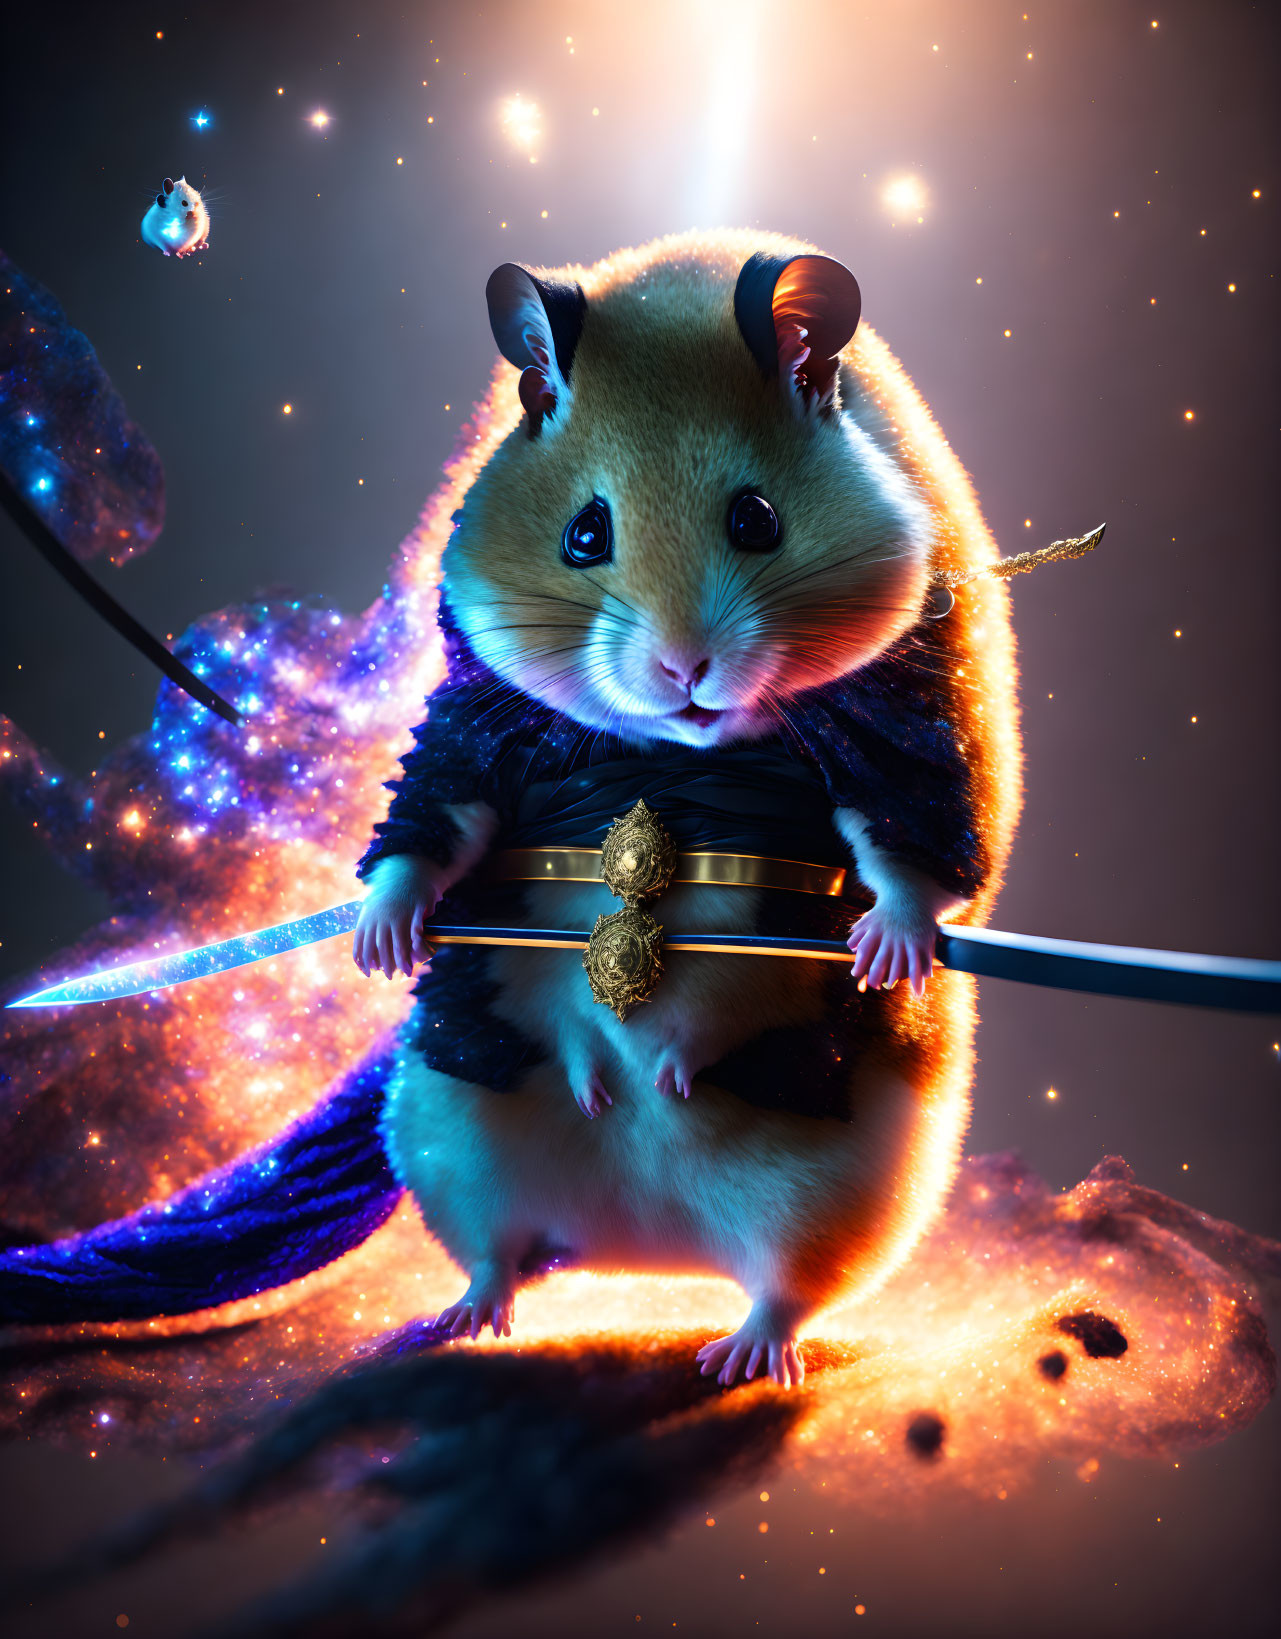 Cosmic warrior hamster with glowing sword in space landscape